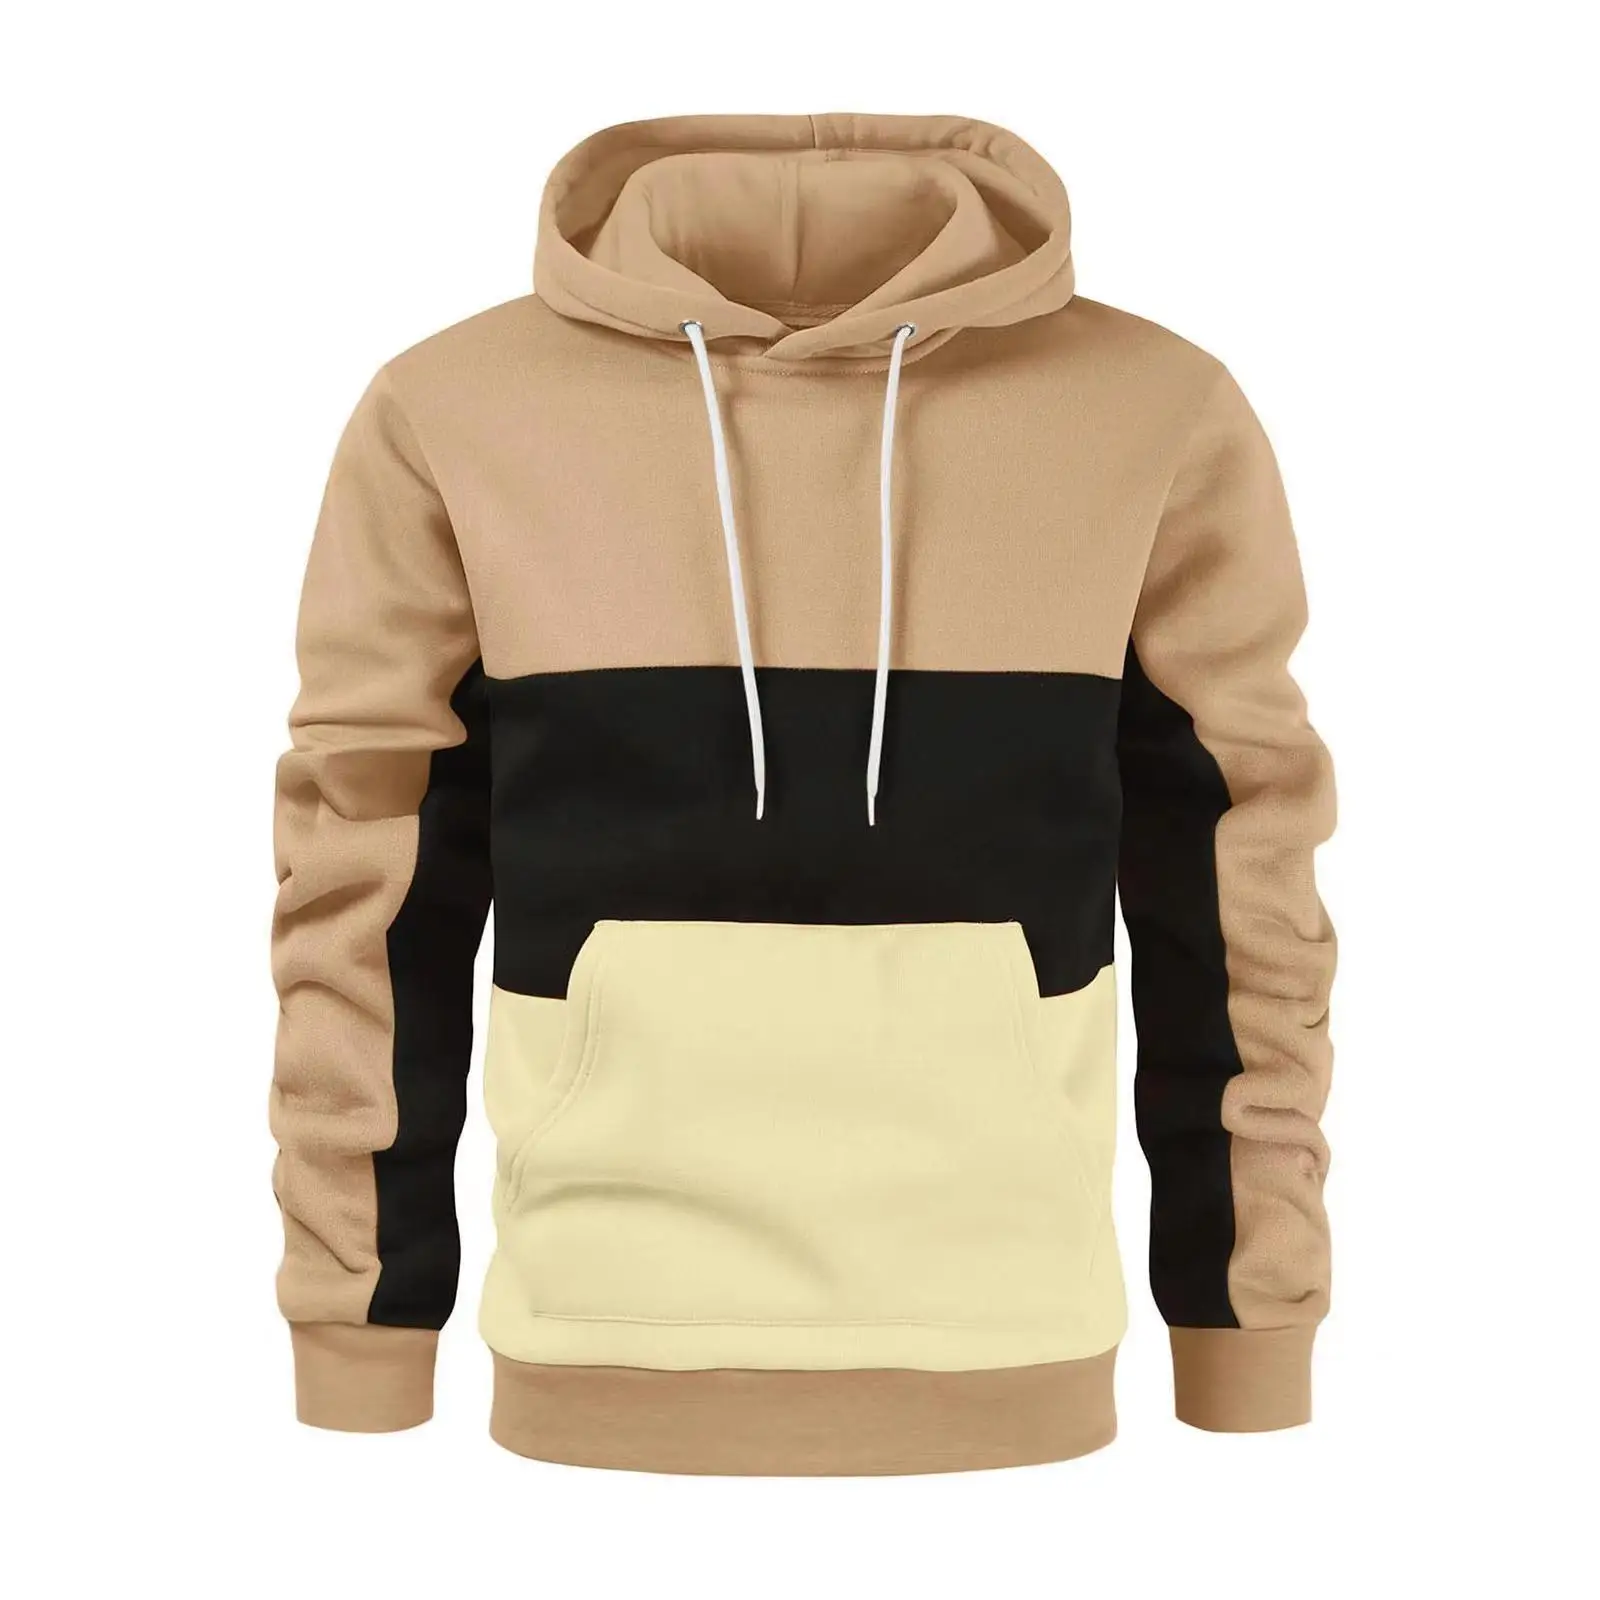 2023 New Men's Patchwork Hooded Hoodies Clothing Casual Sweatshirt Streetwear Male Fashion Sports Pullover Outwear